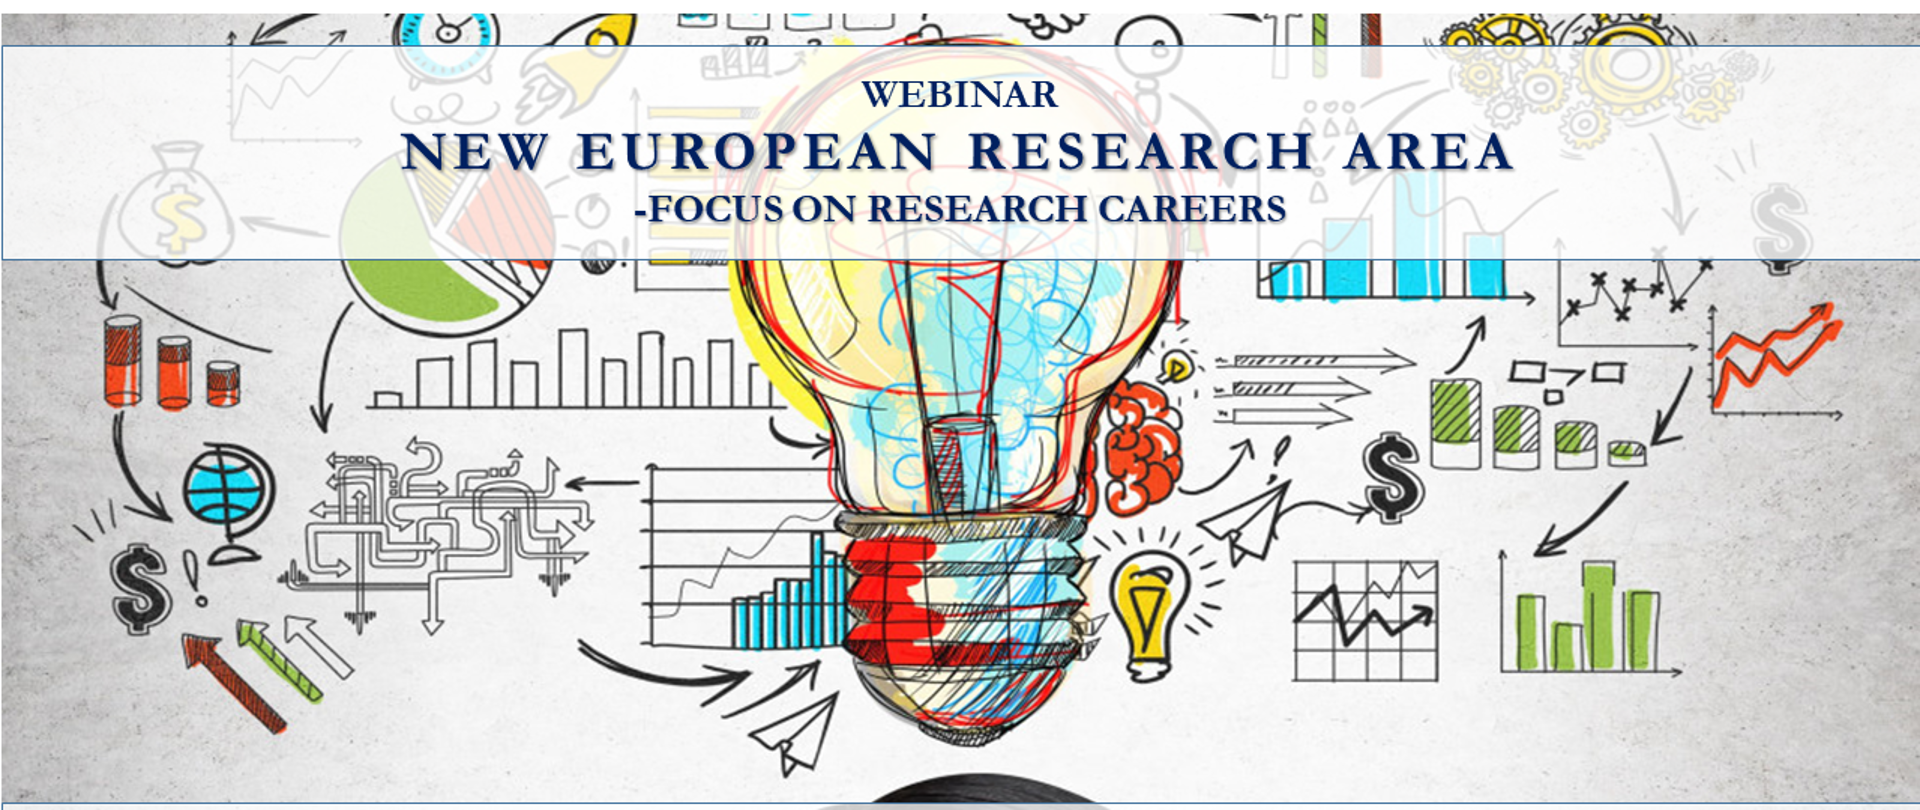 Webinar: ‘New European Research Area - focus on research careers’